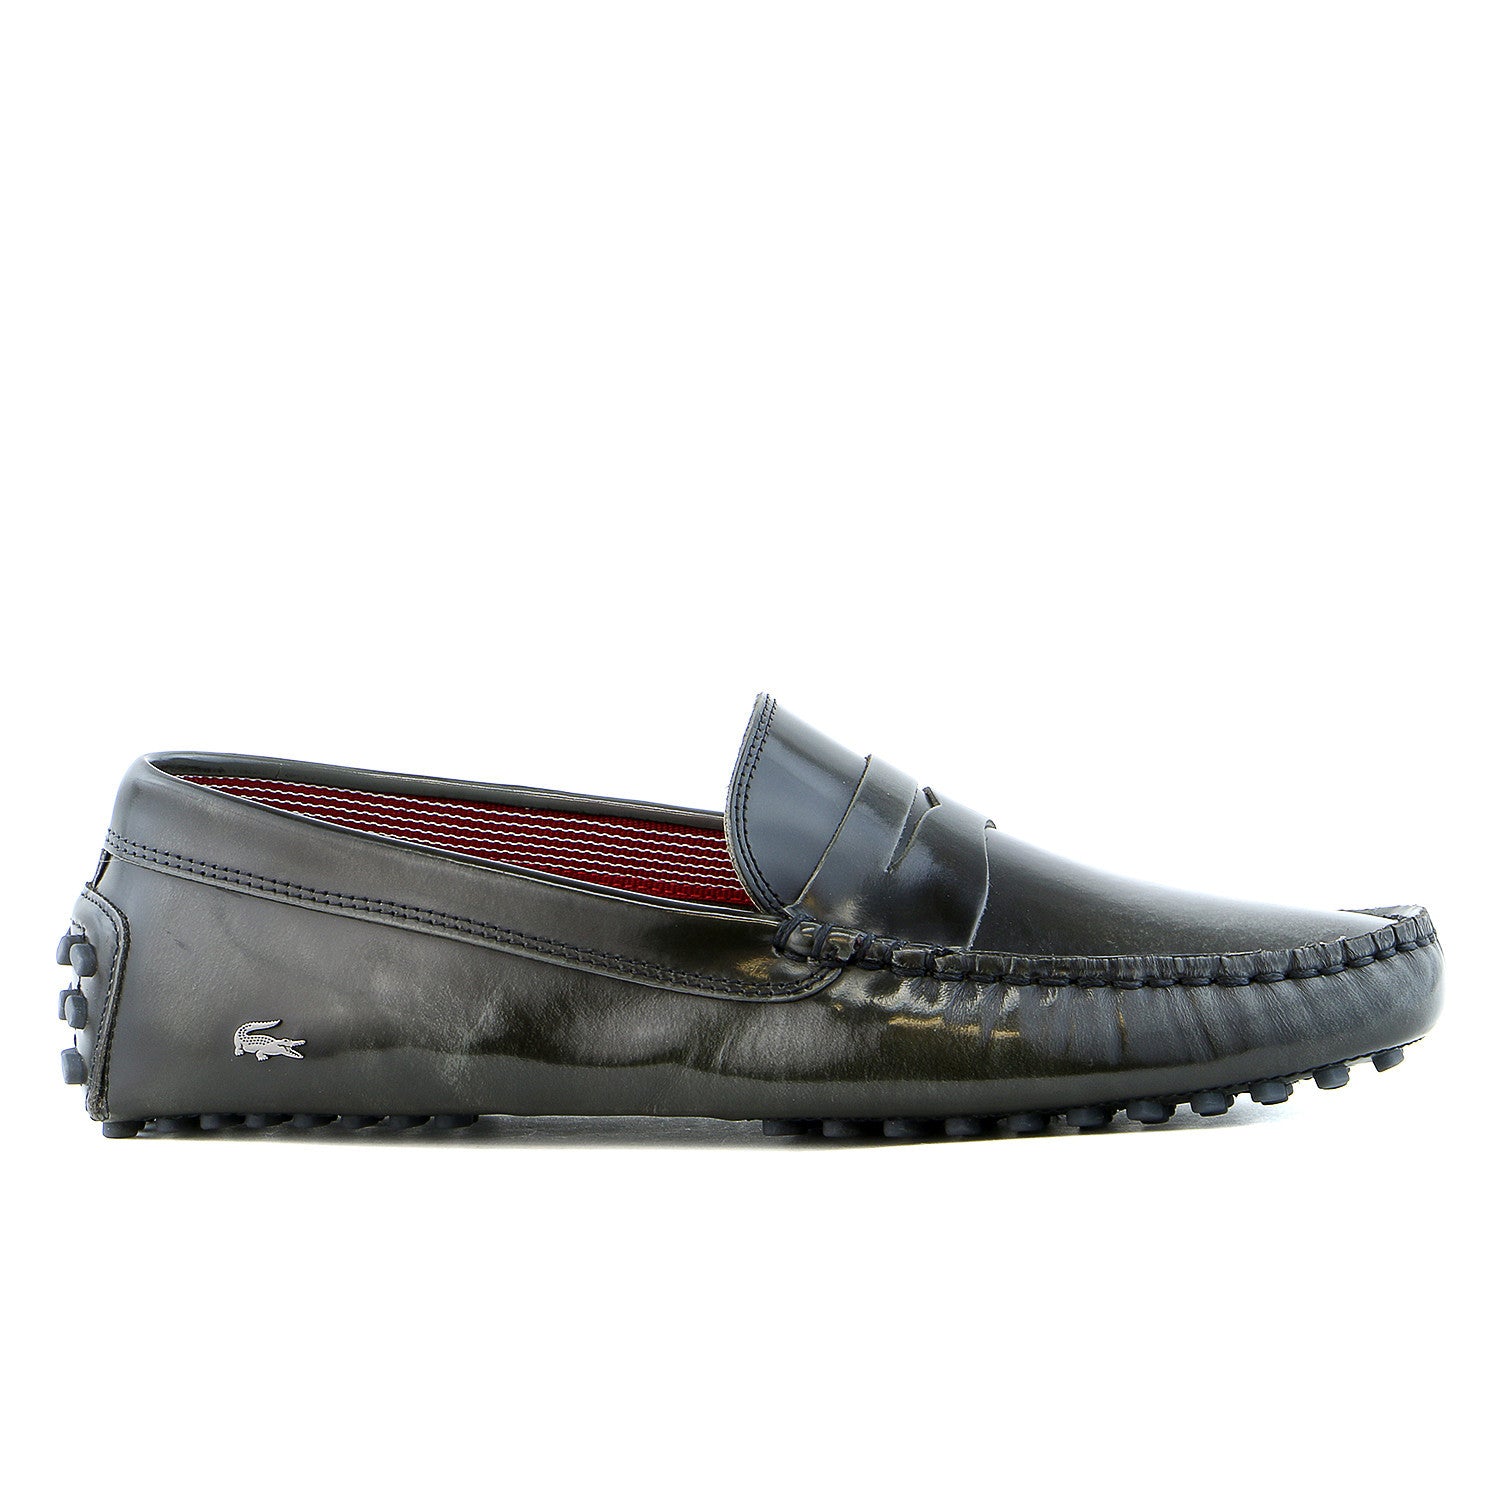 lacoste moccasin shoes